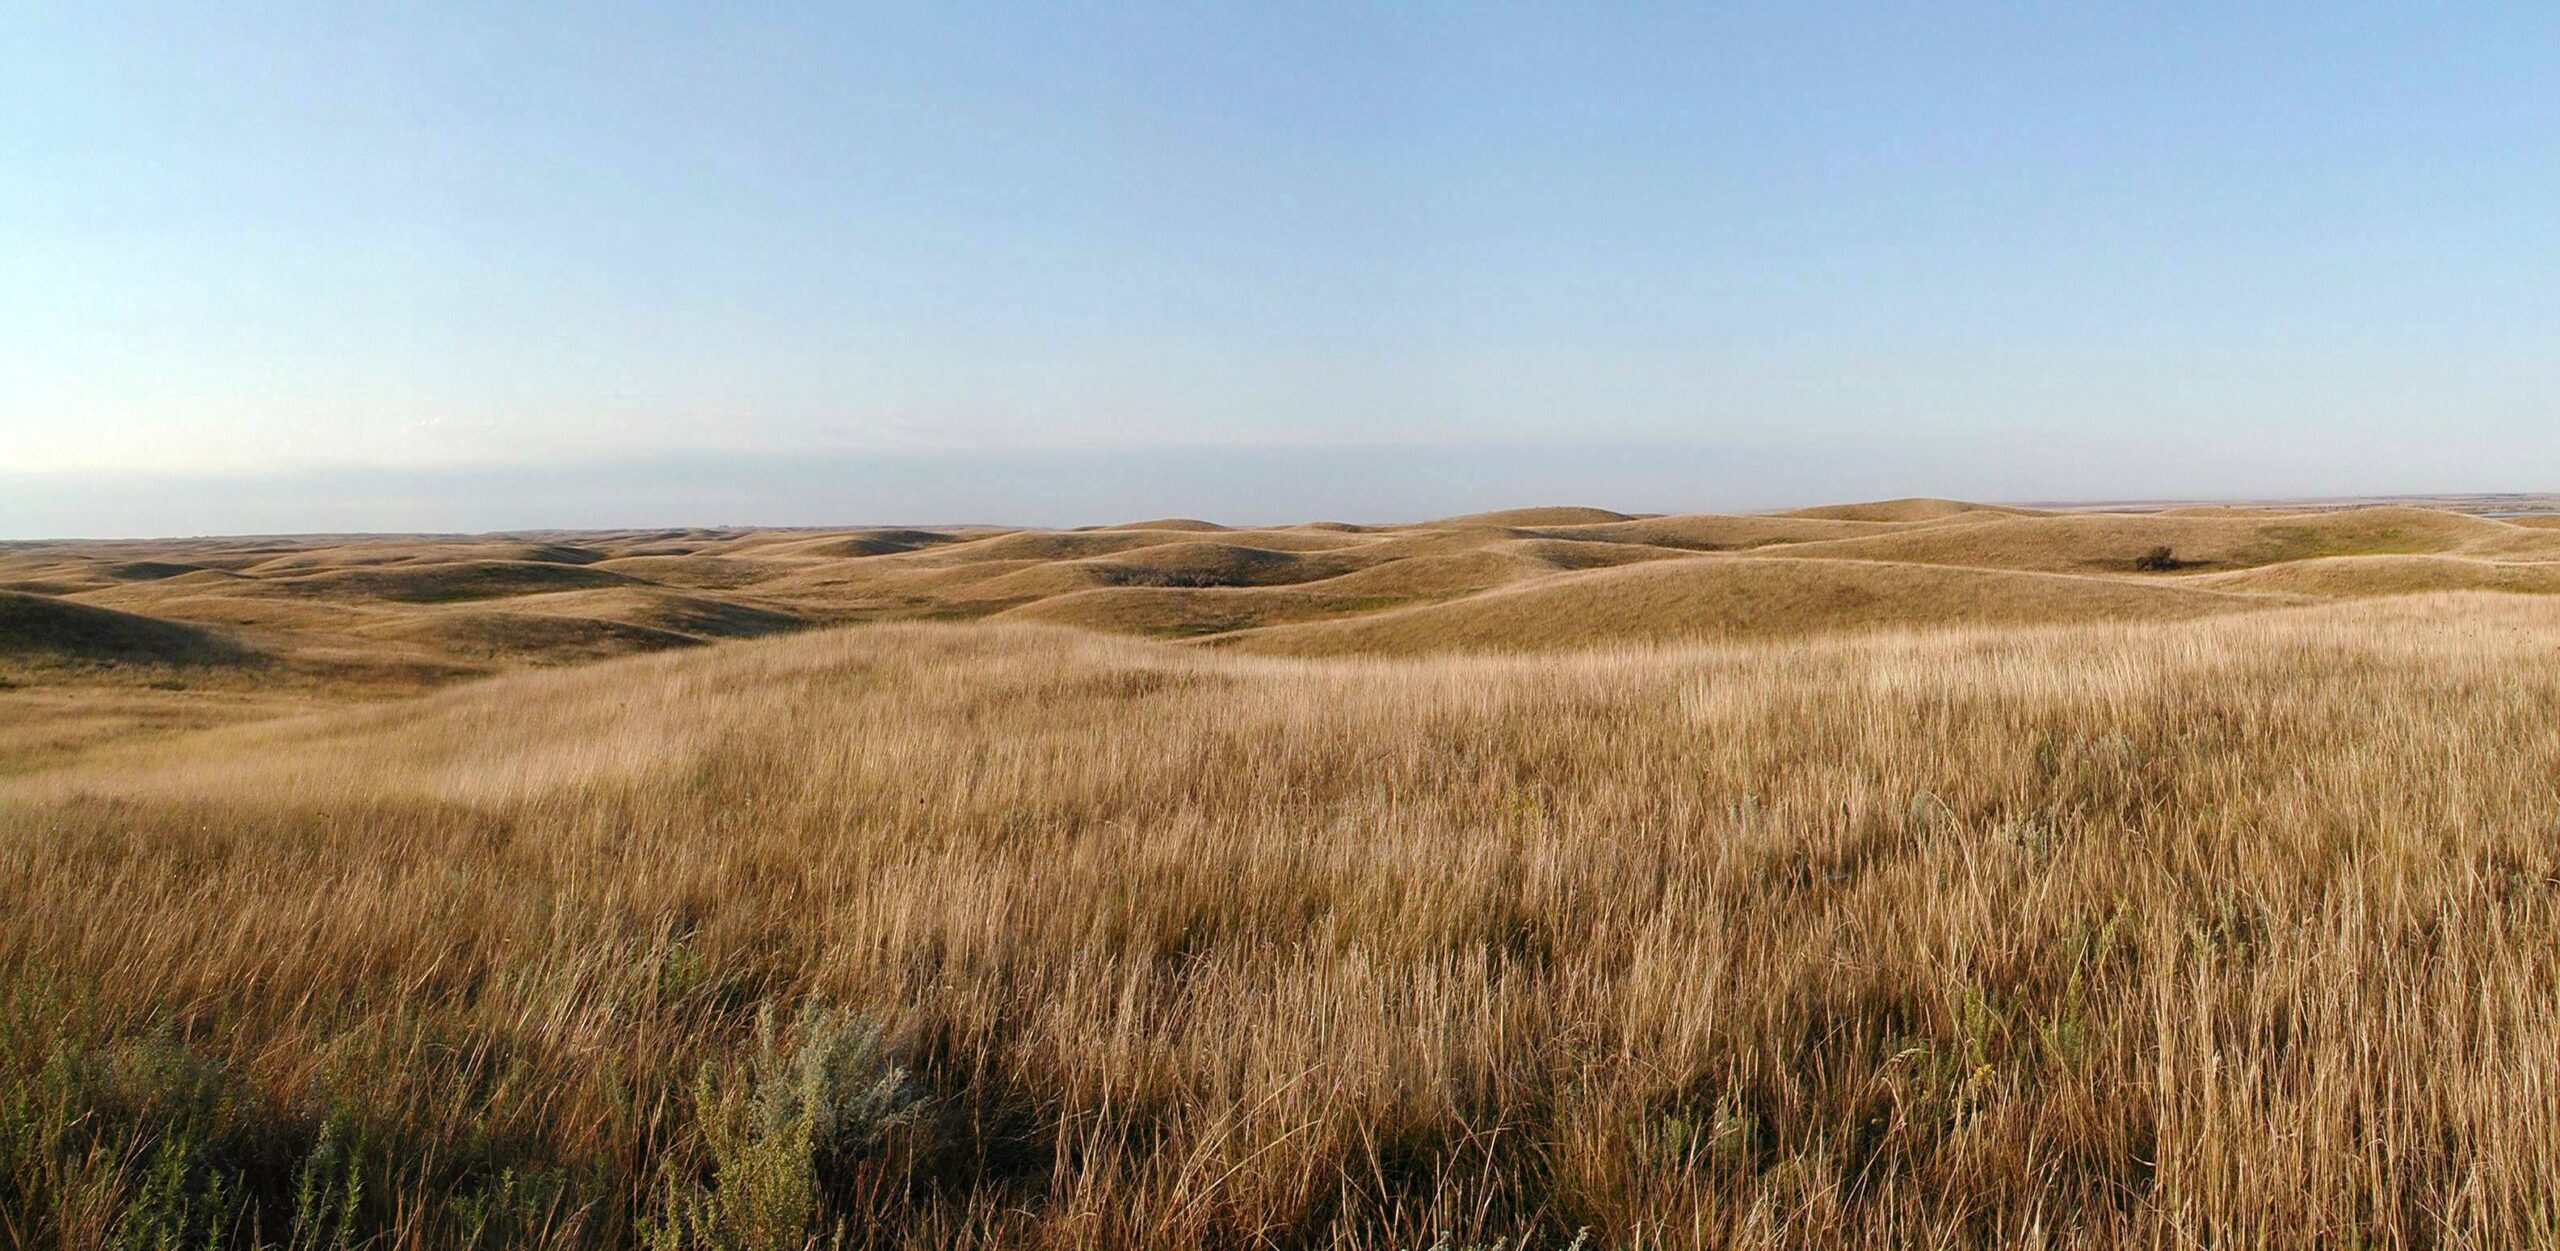 Photograph of a prairie landscape with tall grasses and rolling hills.